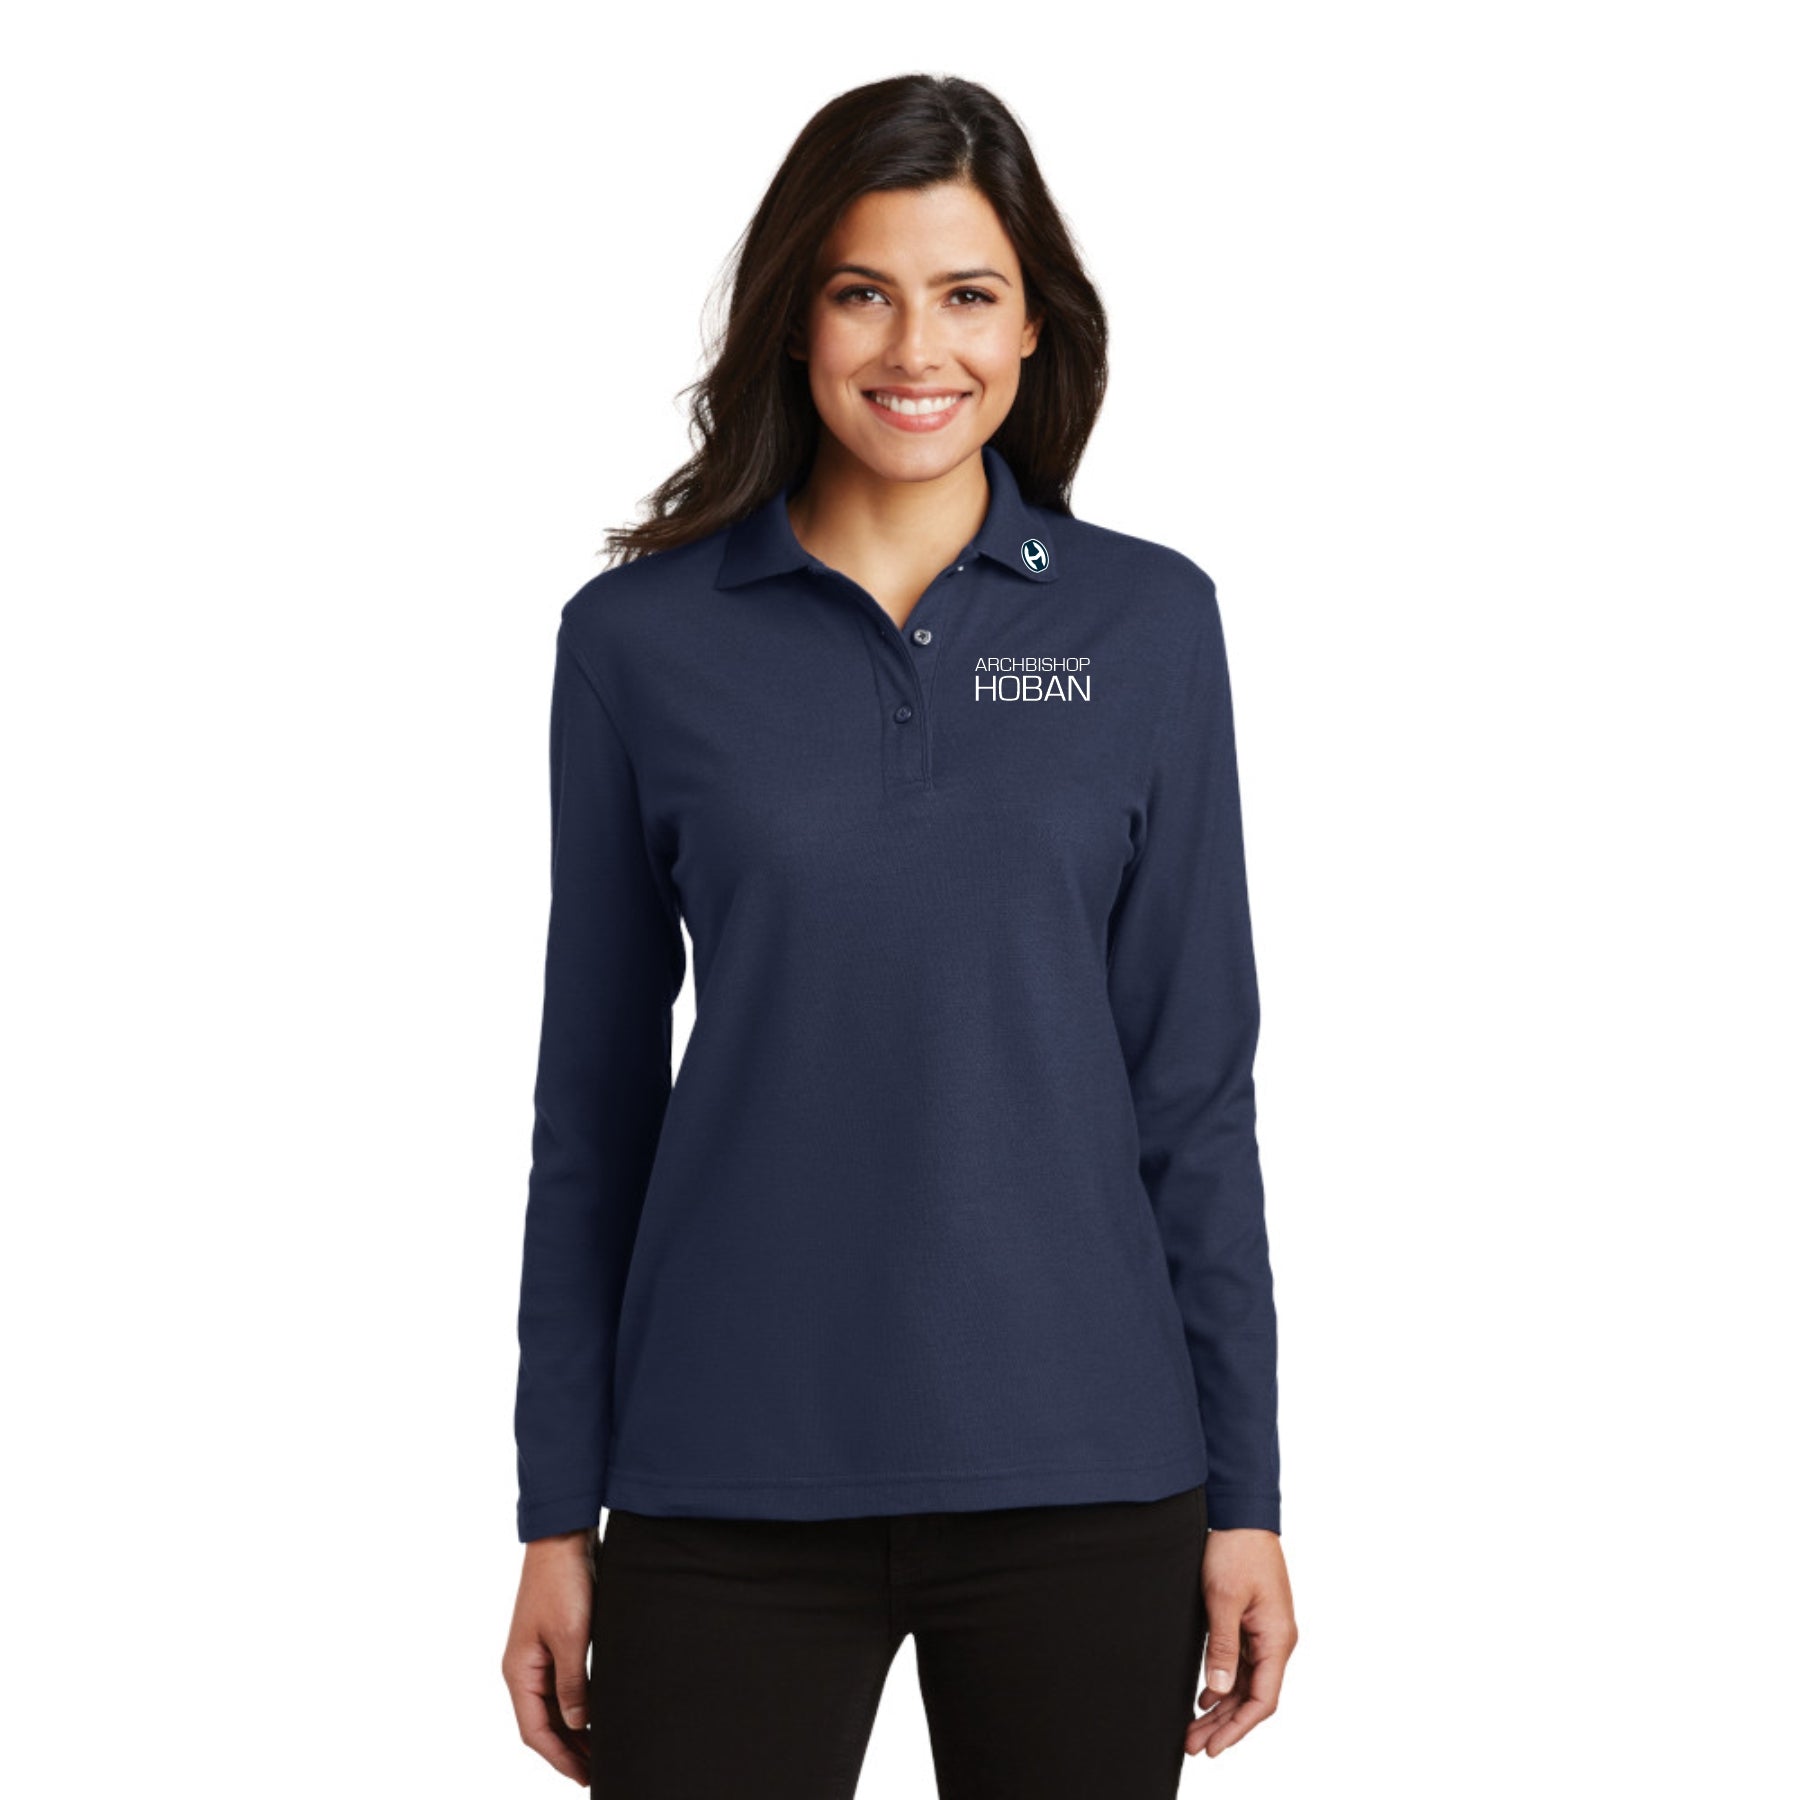 Ladies Long Sleeve Polo Shirt by Port Authority (click for more color options)